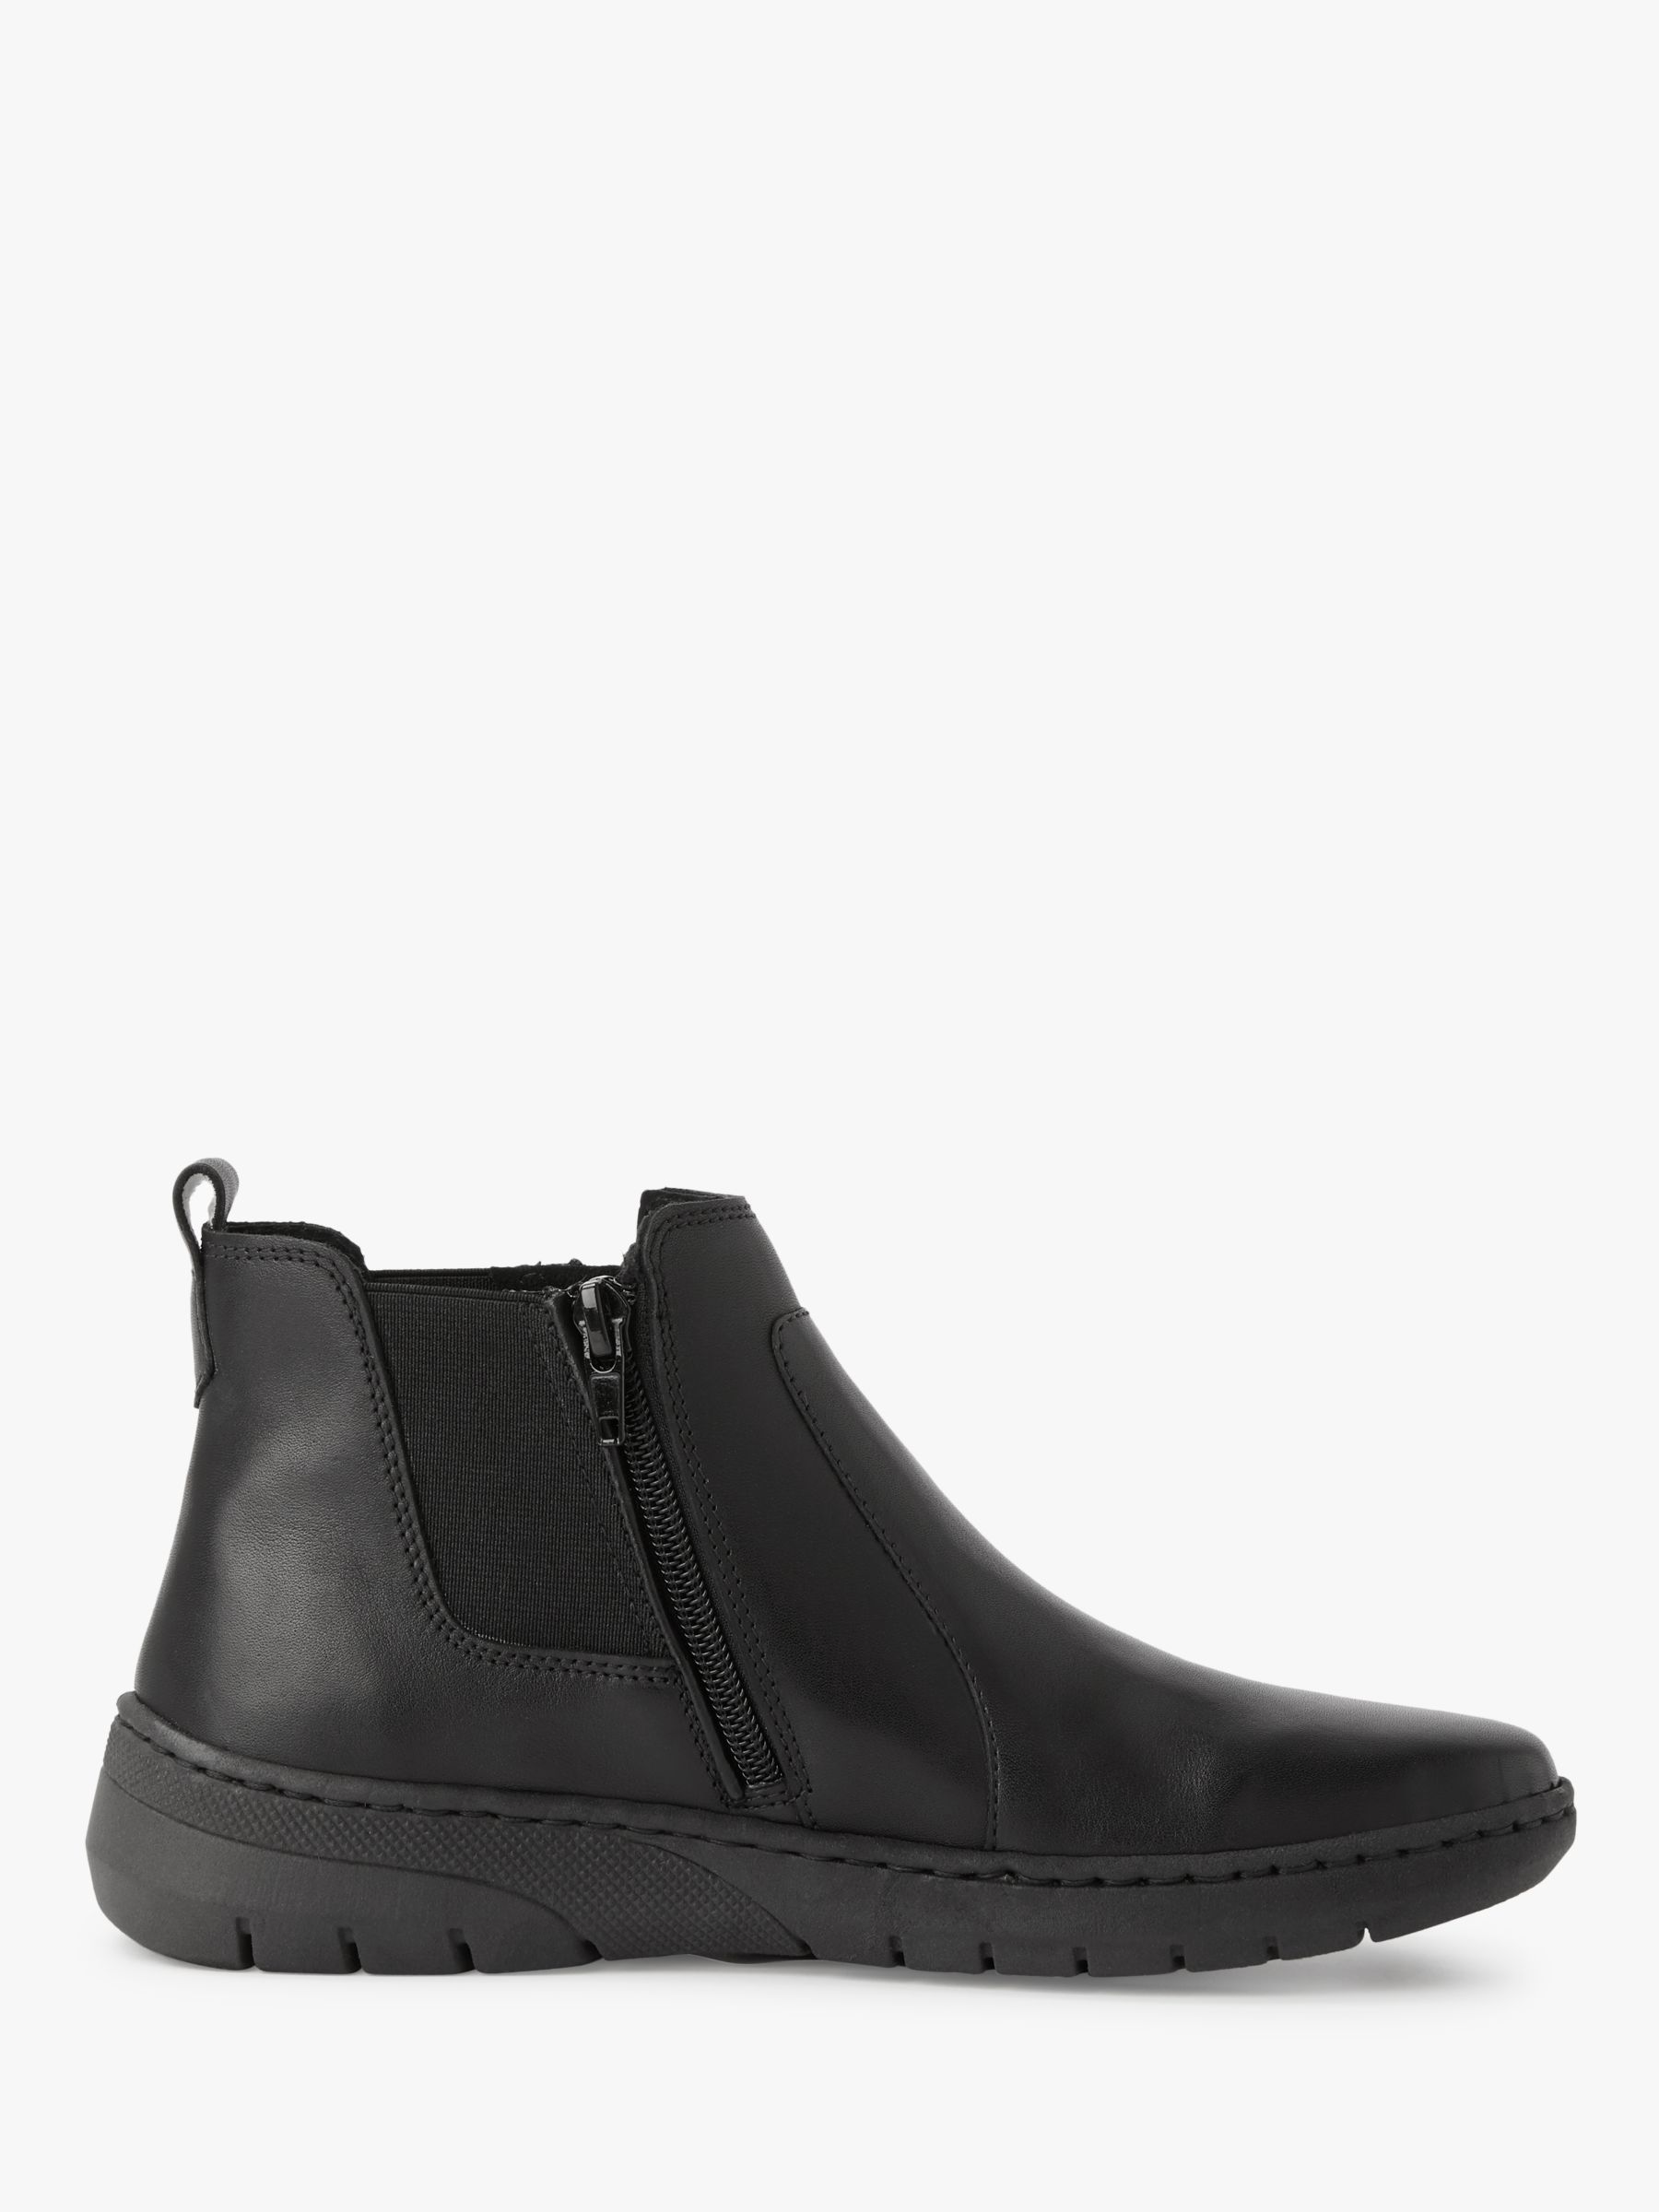 John Lewis Partners Designed For Comfort Yale Flat Ankle Boots Black Leather At John Lewis Partners